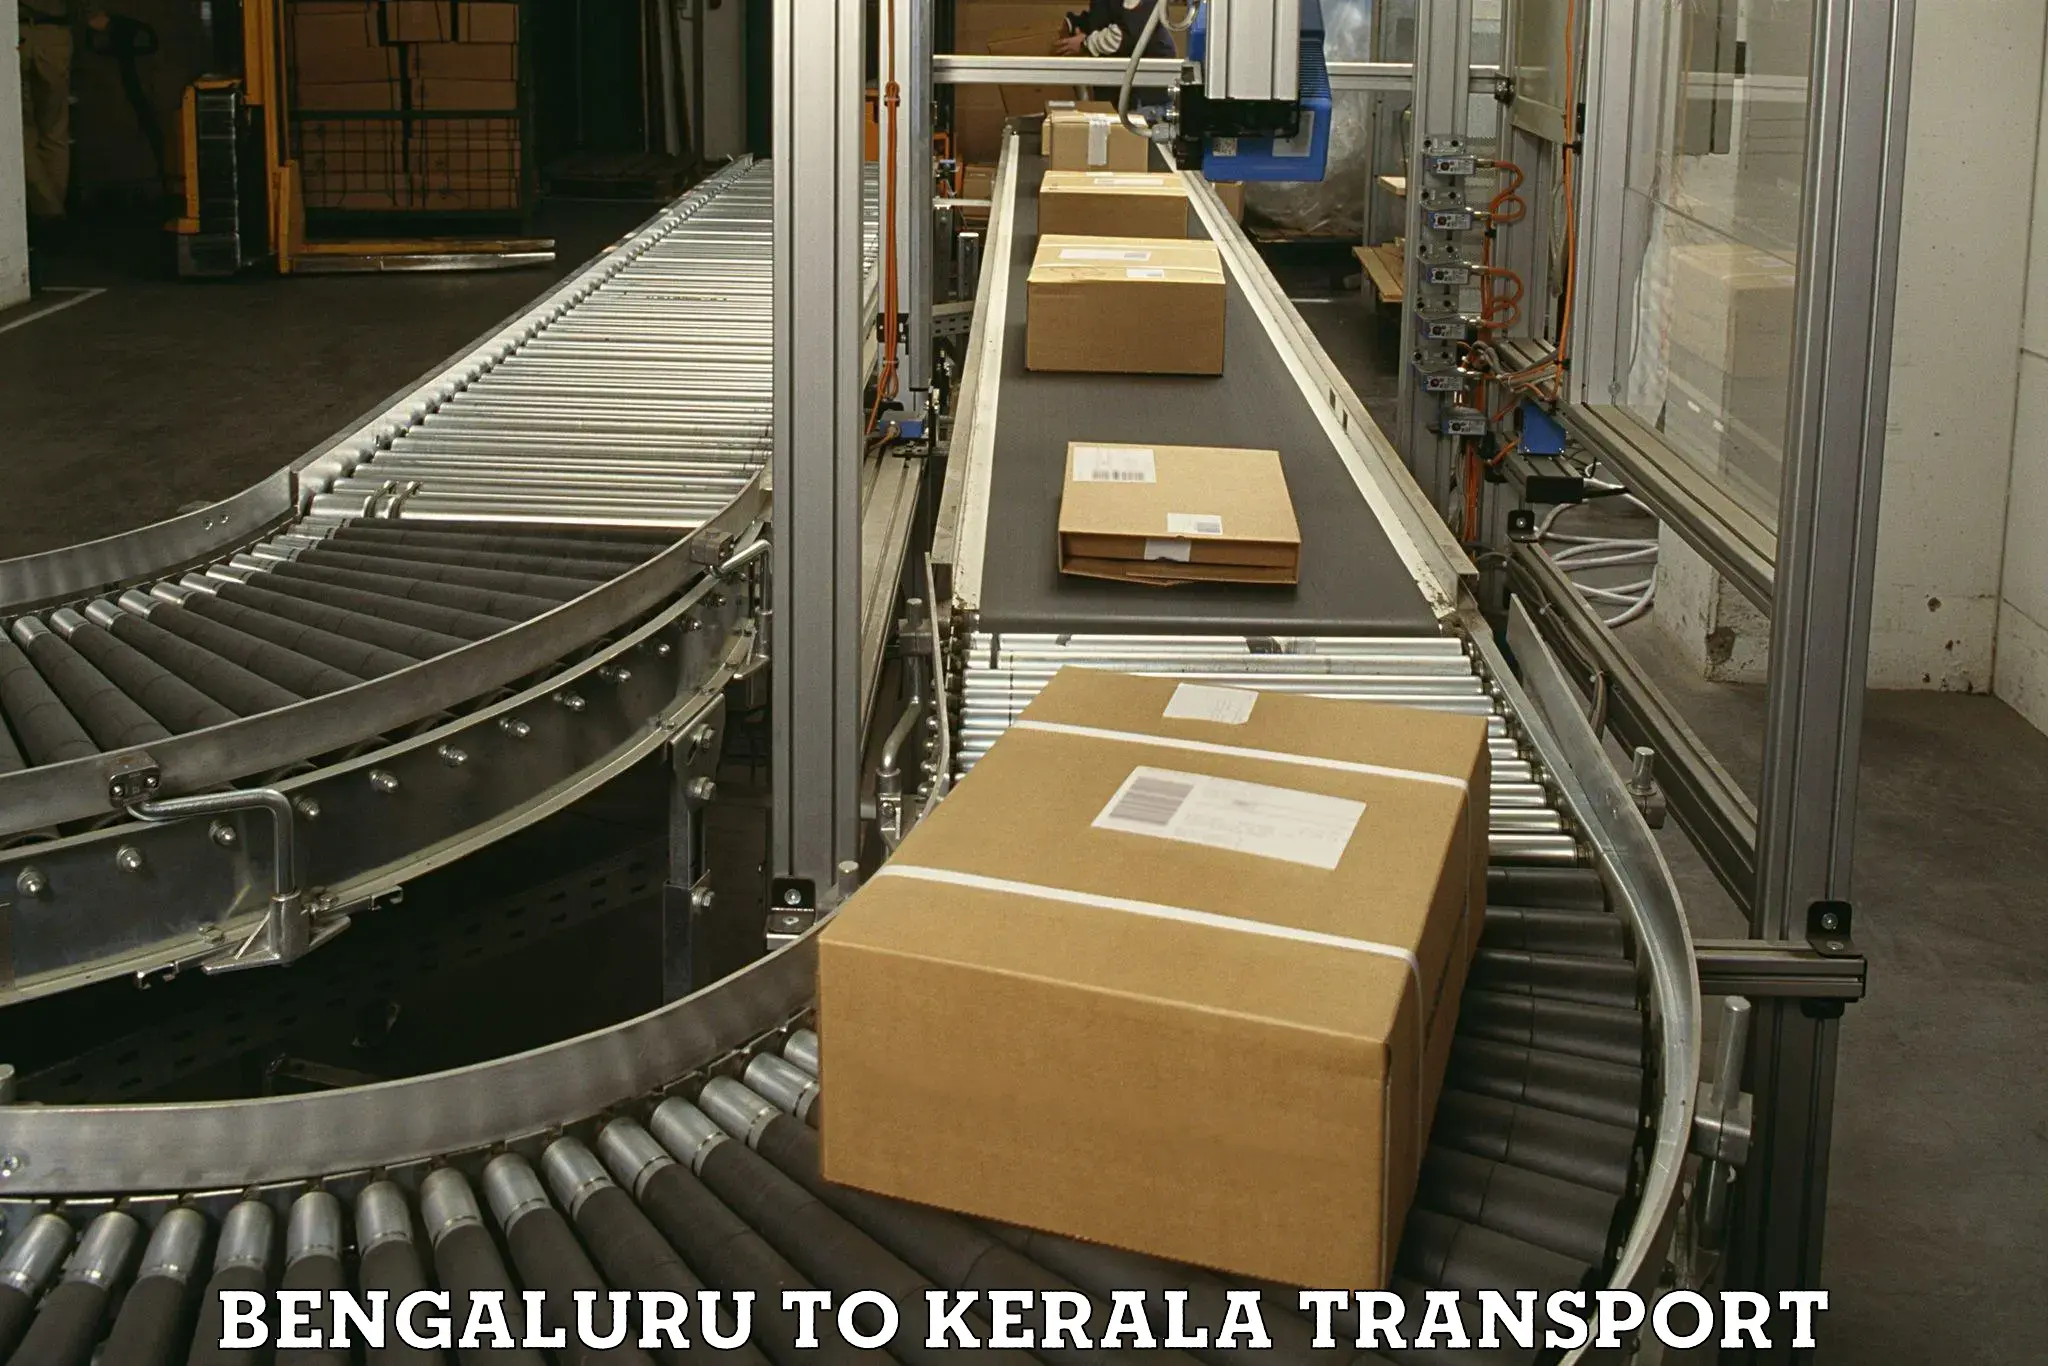 Transport bike from one state to another Bengaluru to Cochin Port Kochi